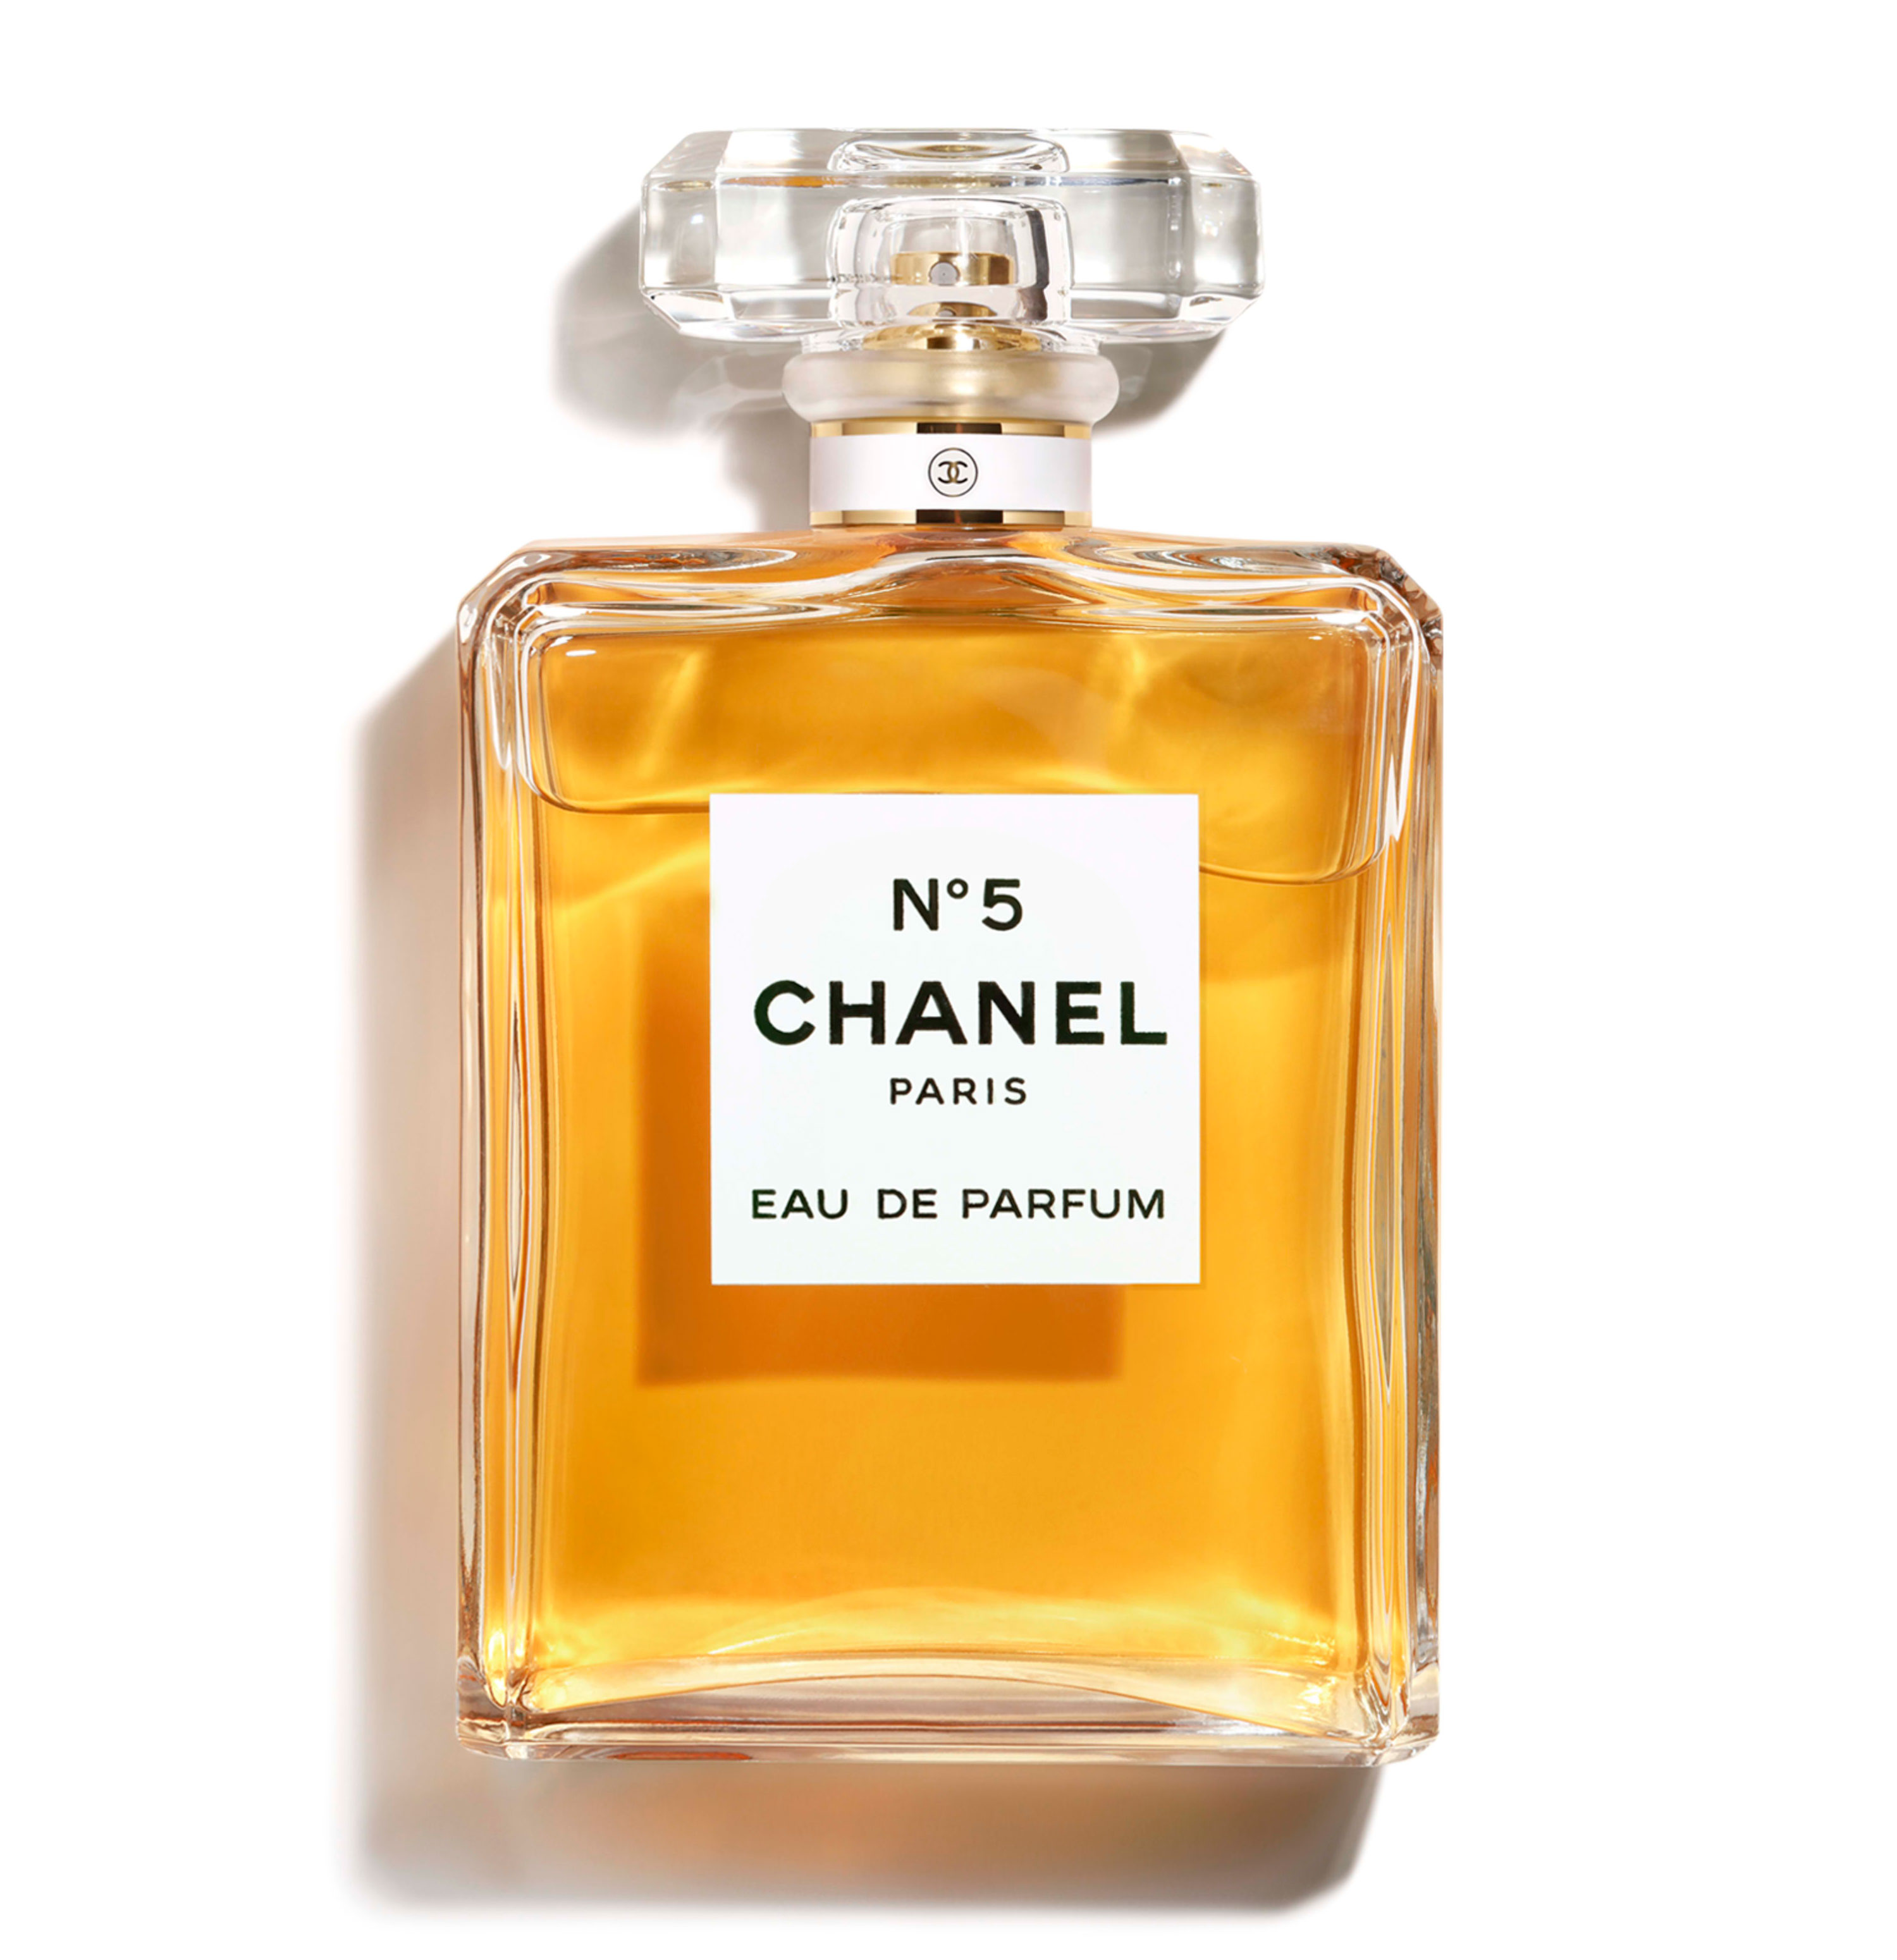 A New Campaign for Chanel No 5 ~ New Fragrances